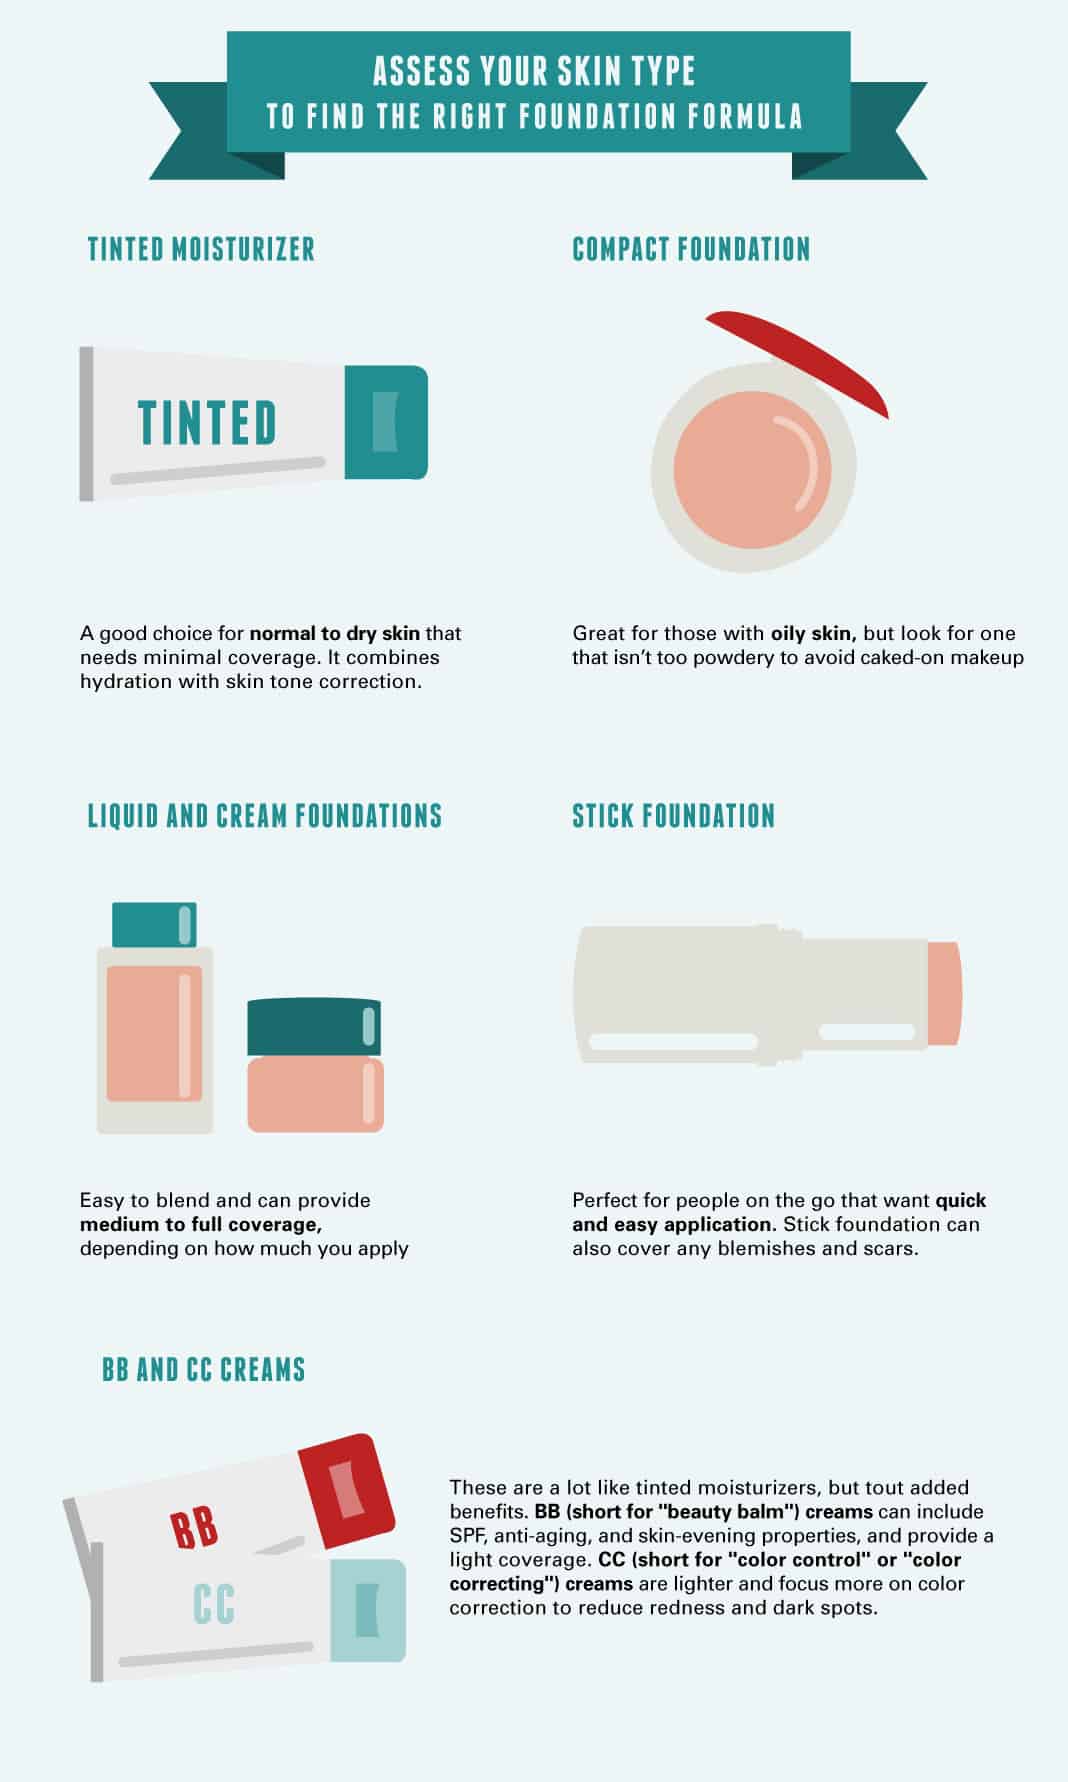 Assess Your Skin Type